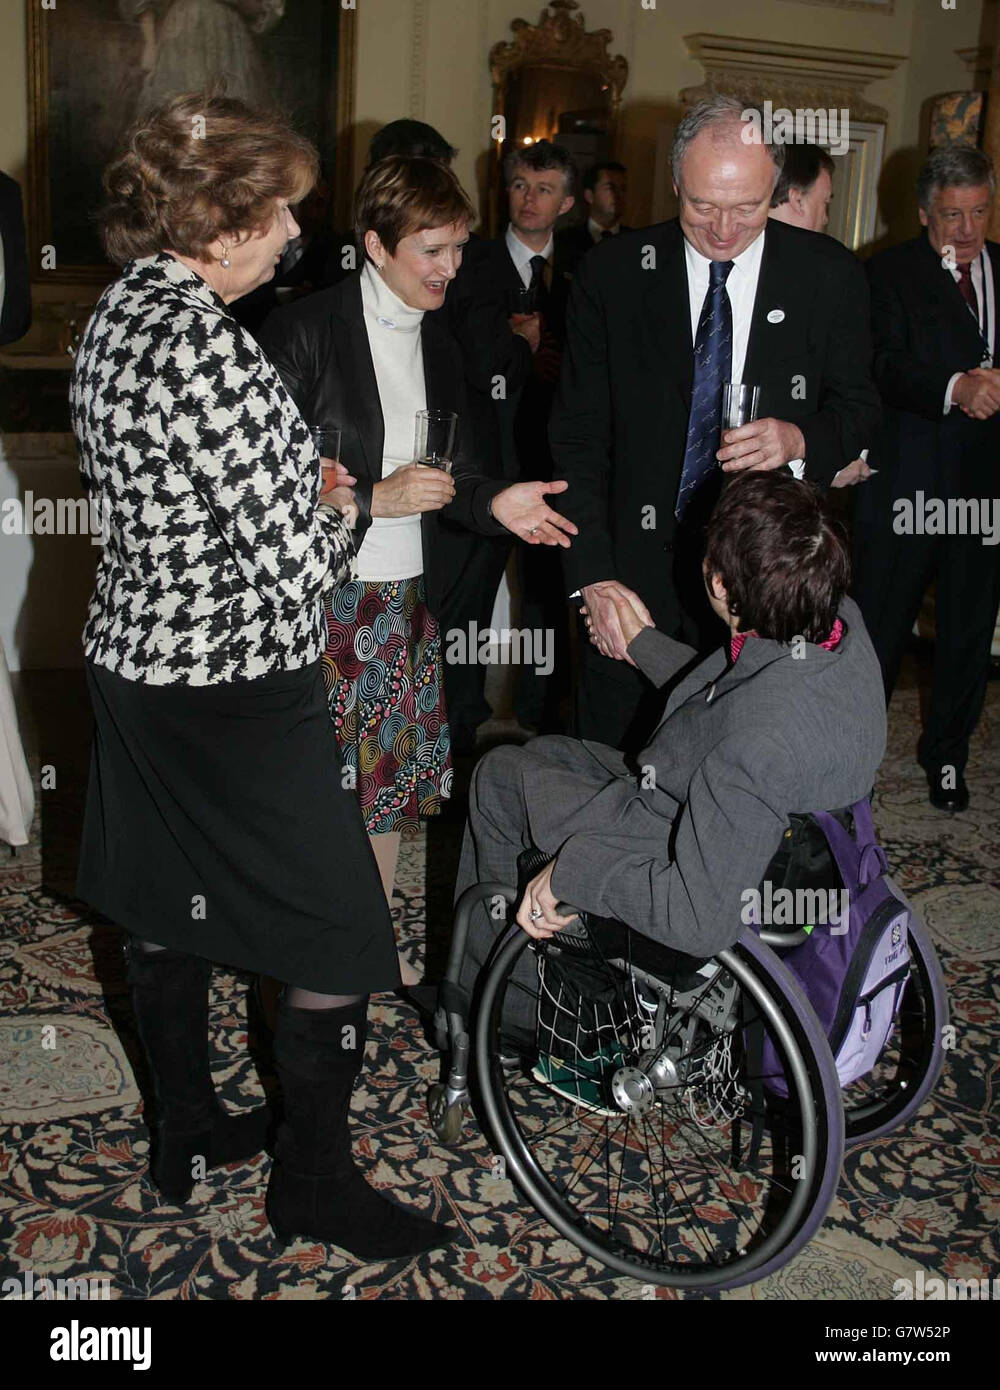 London Mayor Ken Livingstone and Culture Secretary Tessa Jowell meet Olympic Paralympian Dame Tanni Grey Thompson at the reception held by the British Prime Minister Tony Blair. Stock Photo